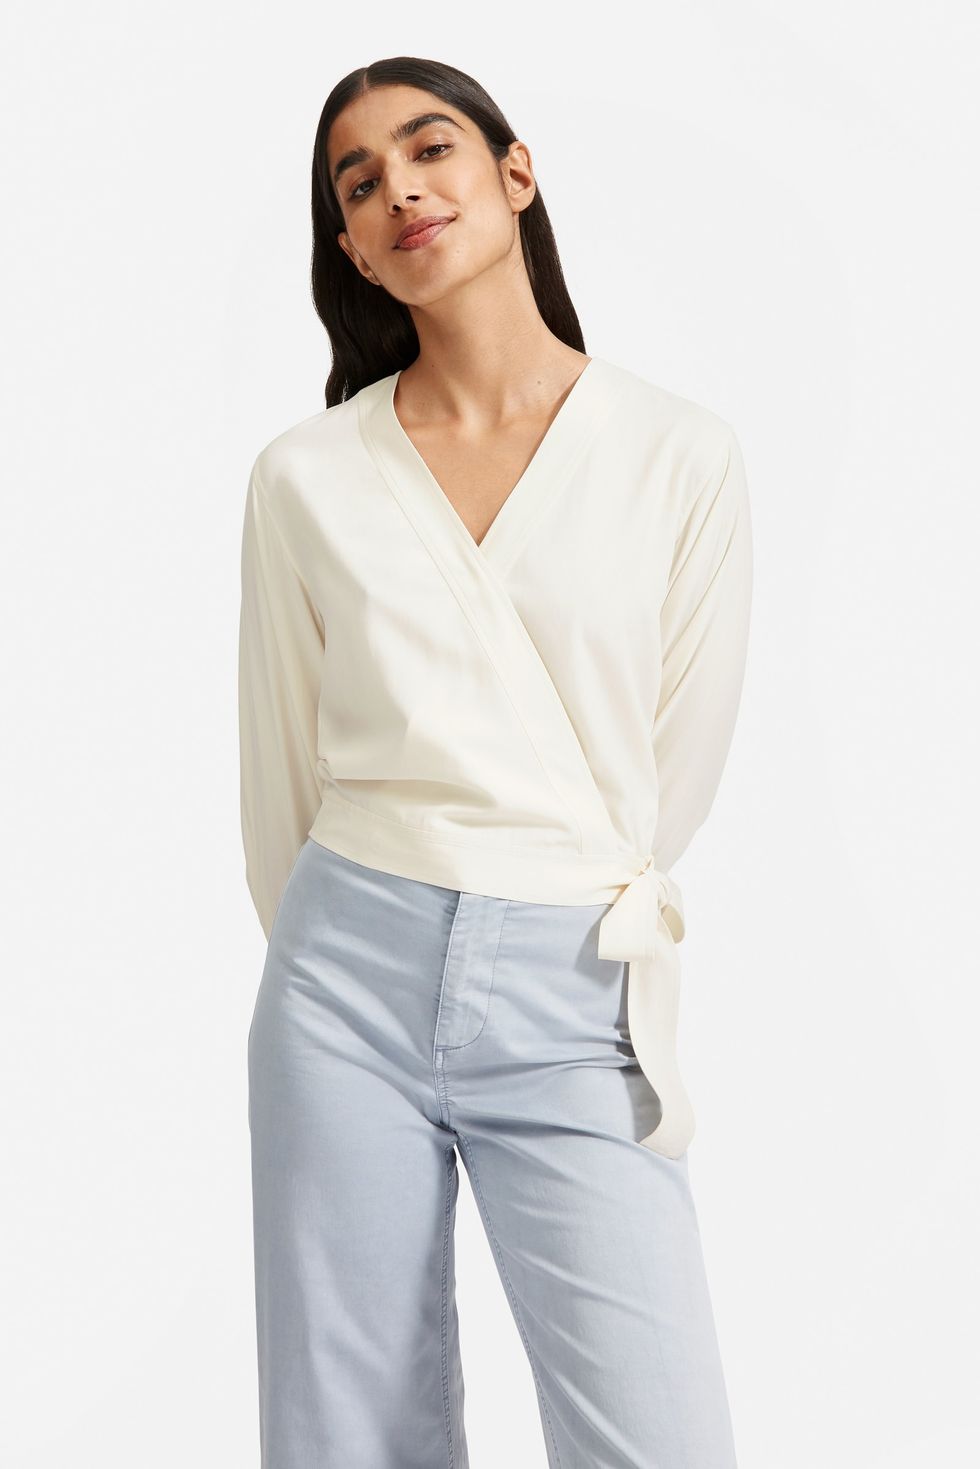 Your Everlane Favorites Are On Sale Now